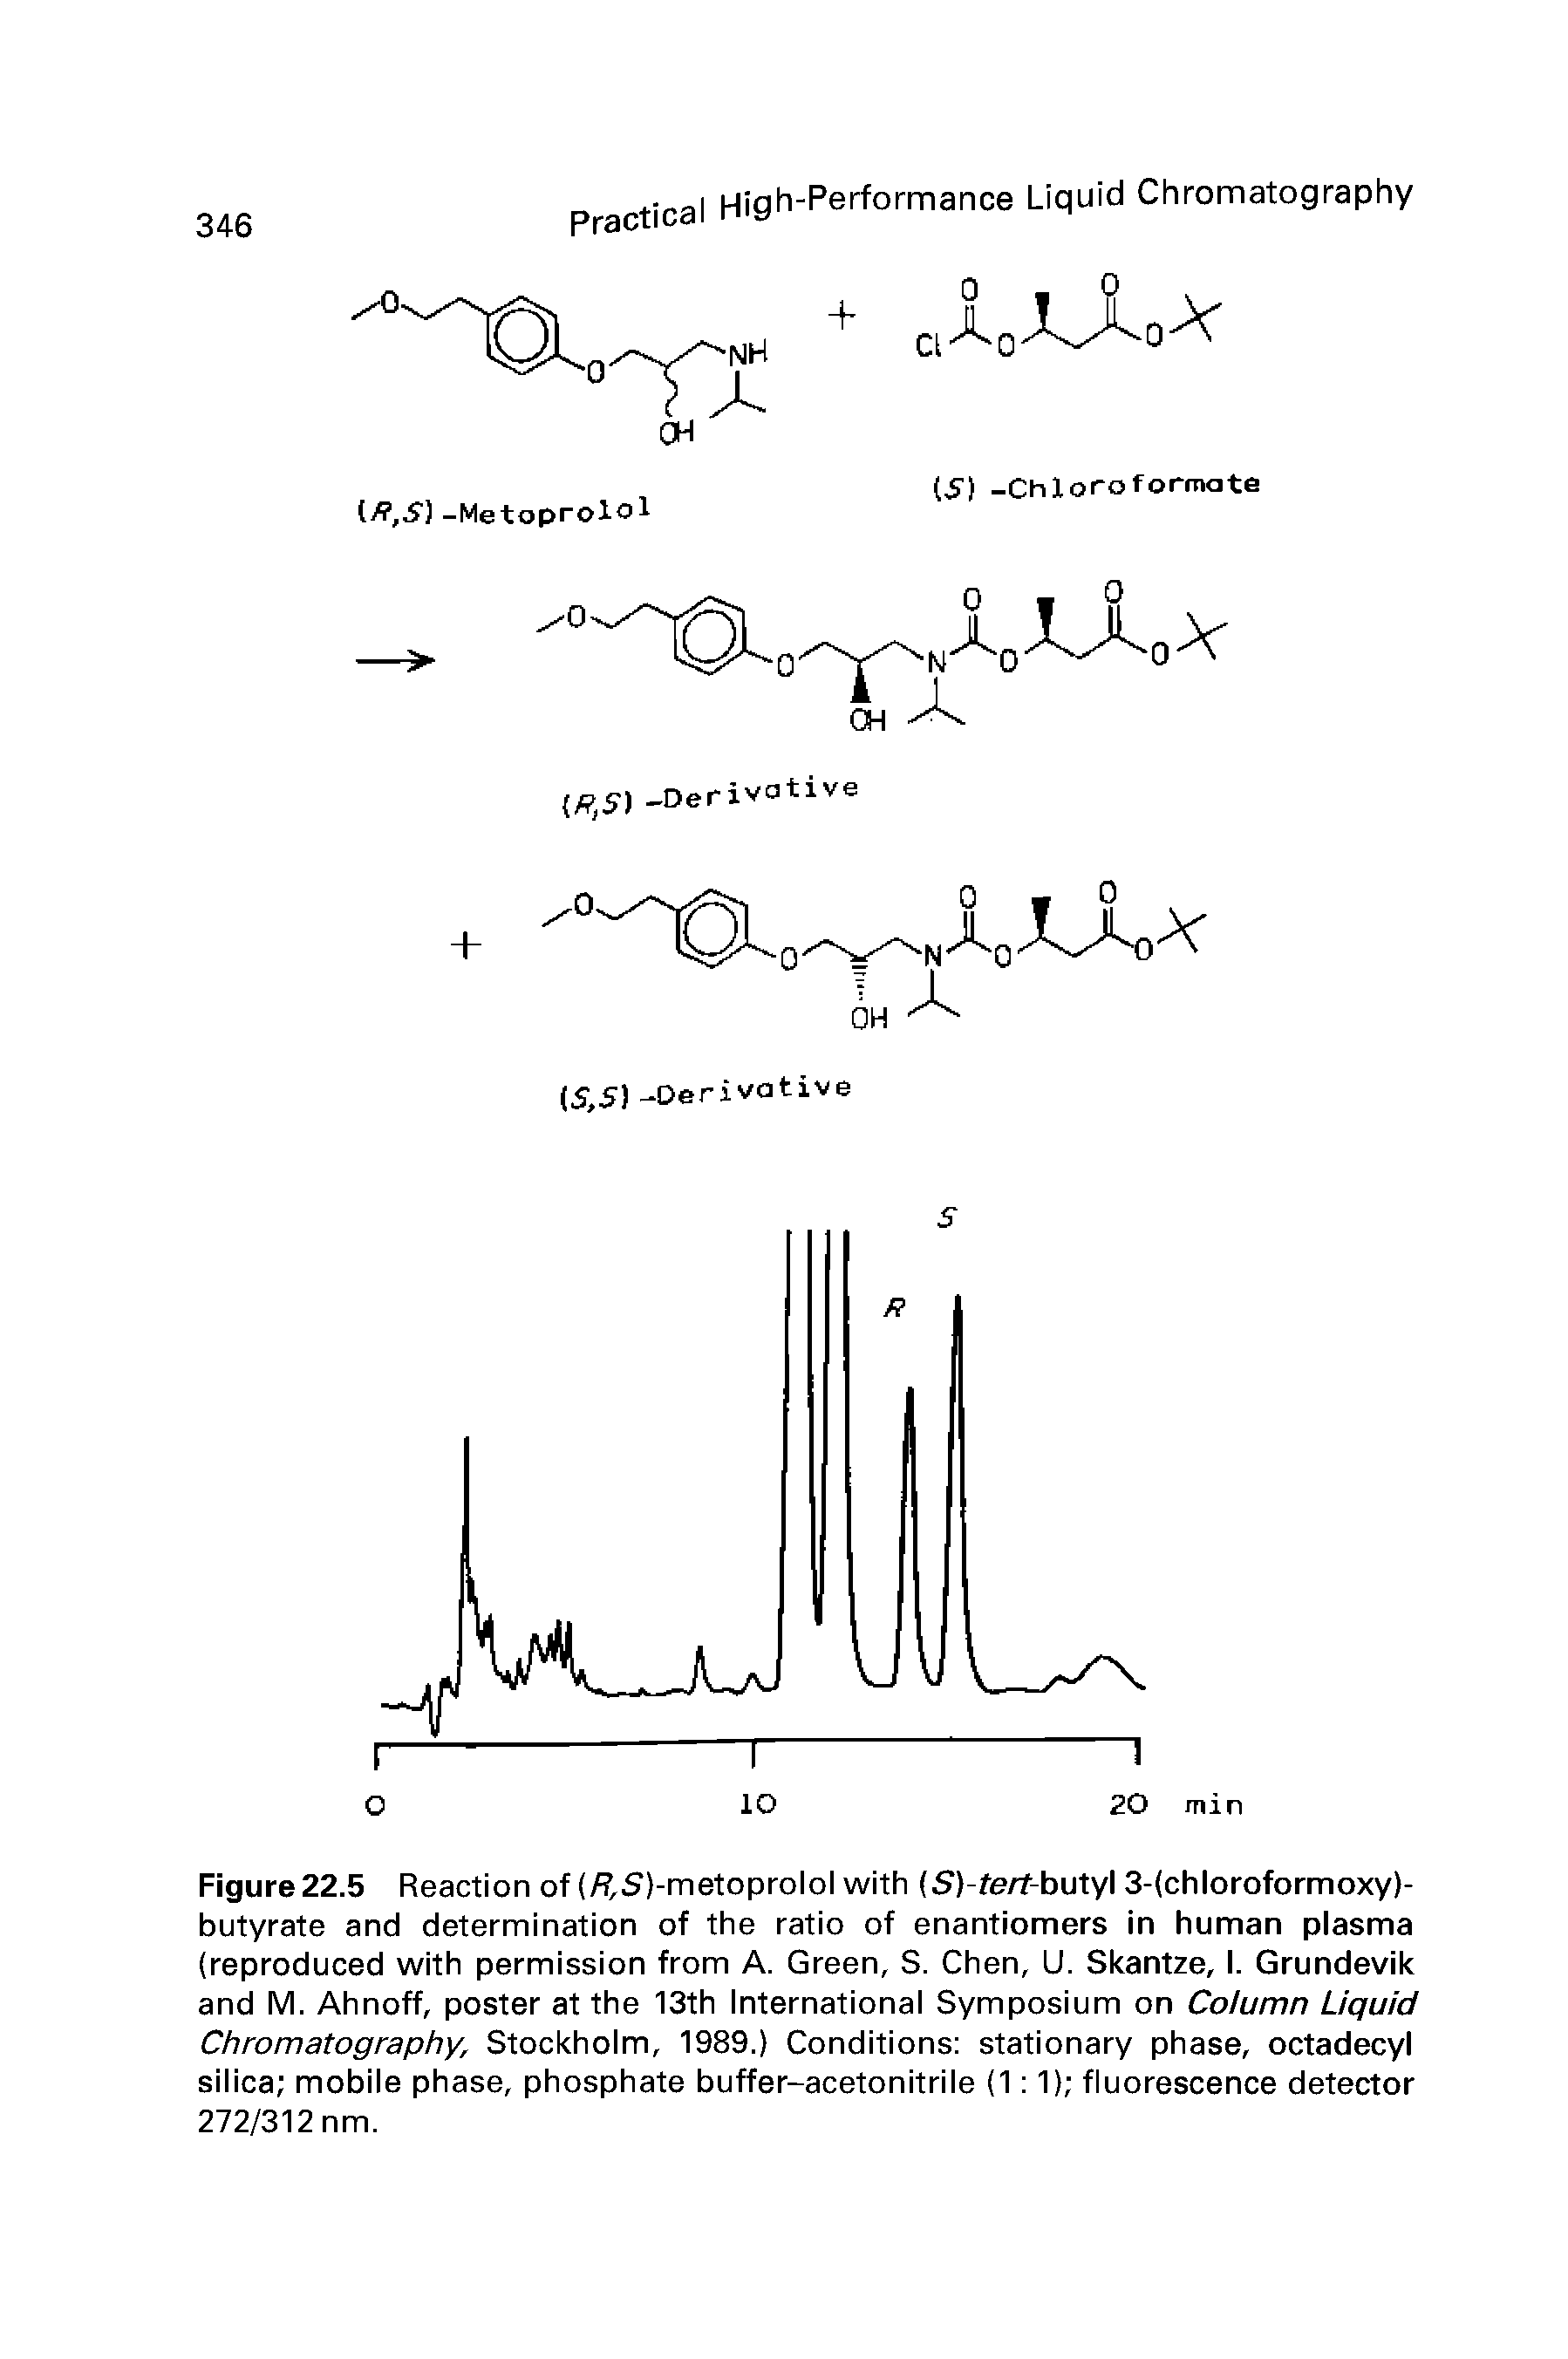 Figure22.5 Reaction of (/ ,S)-metoprolol with (S)-fezr-butyl 3-(chloroformoxy)-butyrate and determination of the ratio of enantiomers in human plasma (reproduced with permission from A. Green, S. Chen, U. Skantze, I. Grundevik and M. Ahnoff, poster at the 13th International Symposium on Column Liquid Chromatography, Stockholm, 1989.) Conditions stationary phase, octadecyl silica mobile phase, phosphate buffer-acetonitrile (1 1) fluorescence detector 272/312 nm.